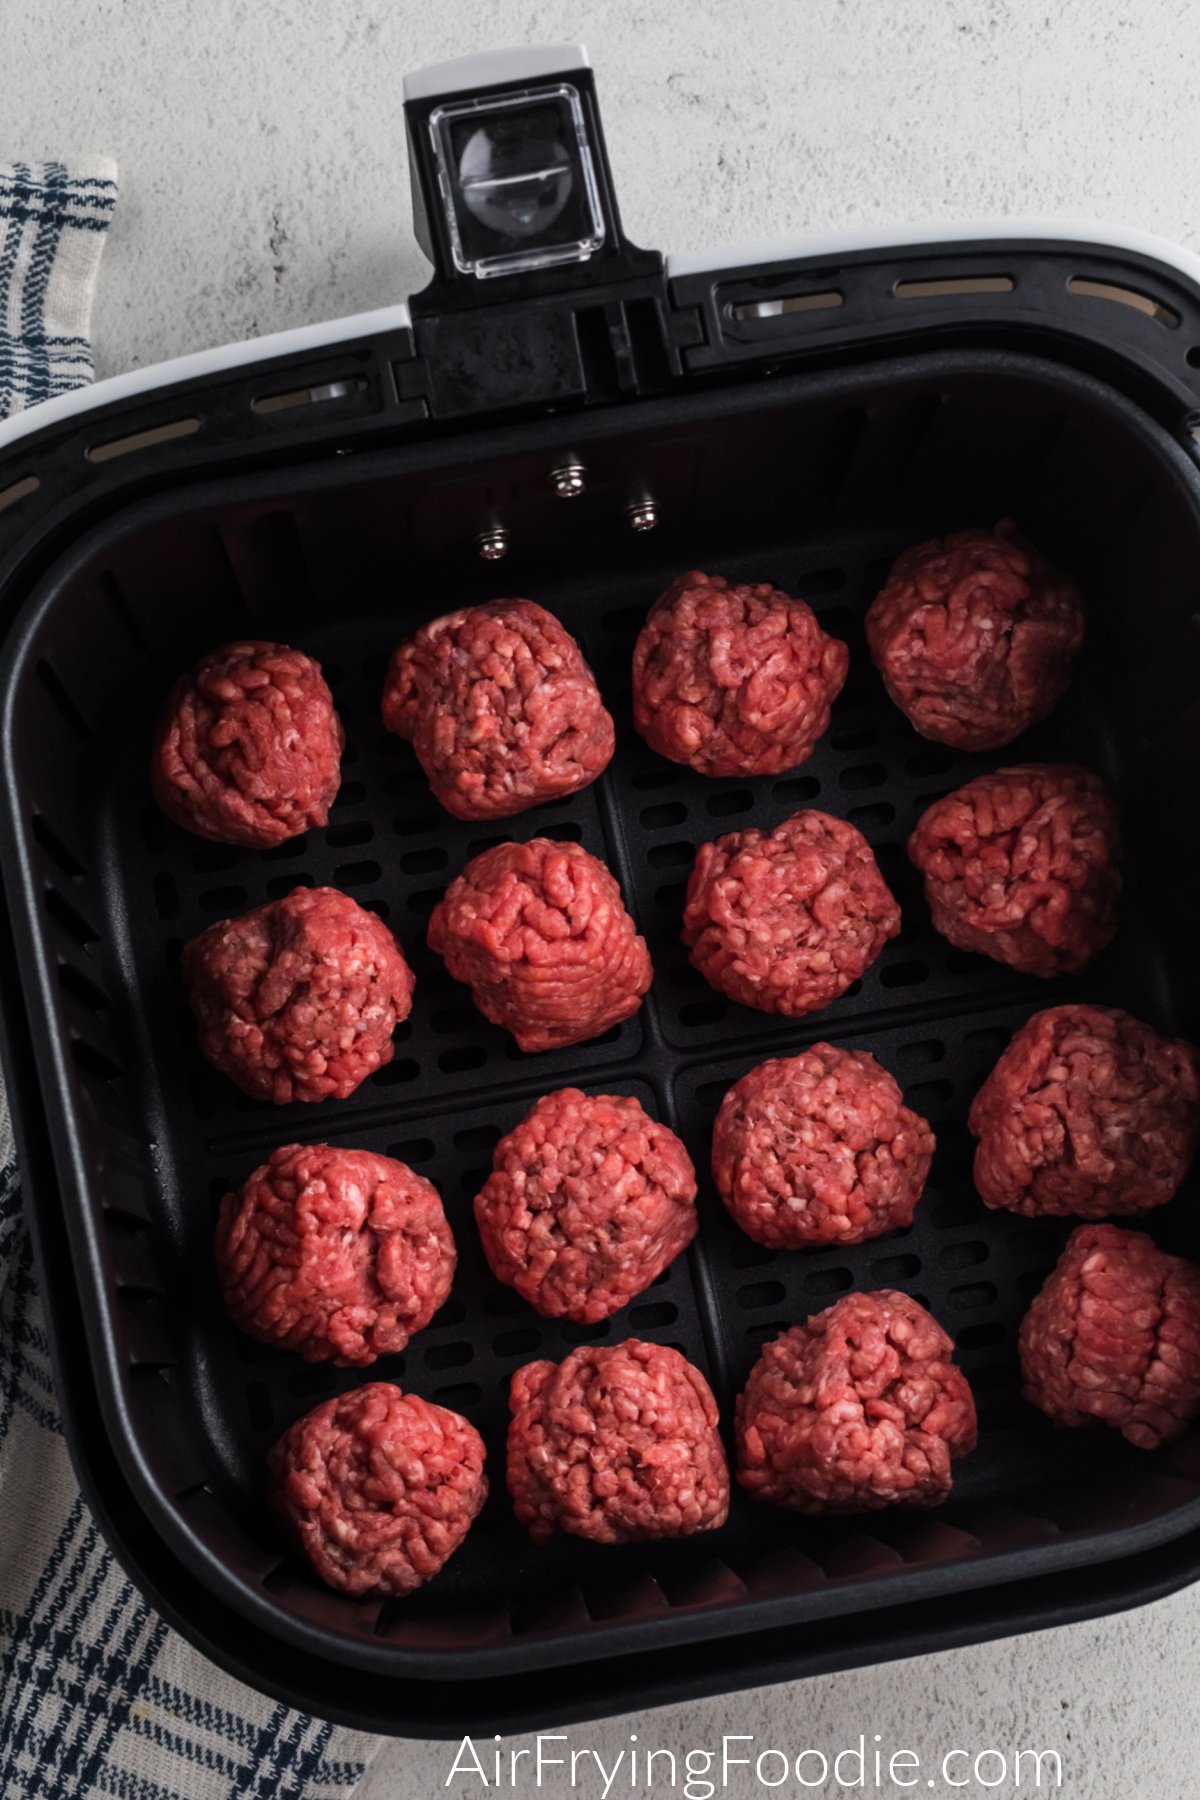 Homemade meatballs in the basket of the air fryer for cheeseburger bombs